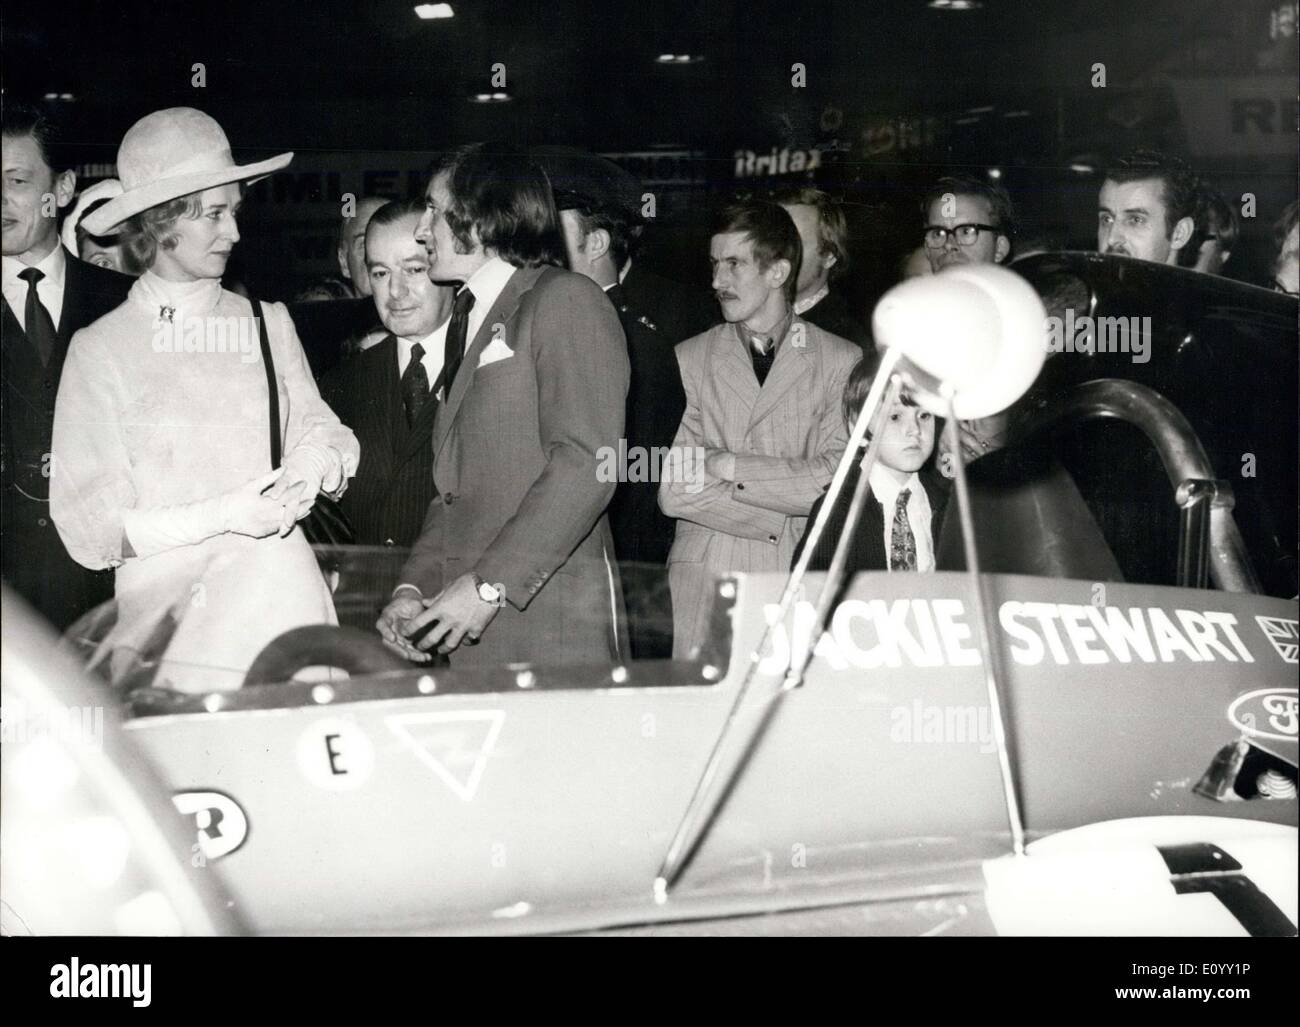 Oct. 20, 1971 - Princess Alexandra opens Motor show.: princess Alecandra this morning opened the 1971 Motor Show at Earls Court, London after making a tour of the show with her husband, Mr. Angus Ogilvy. Photo shows Princess Alexandra is talking to World Racing Champion Jackie Stewart during her tour of the show in the foreground is the World Champion's car the Tyrell Ford. Stock Photo